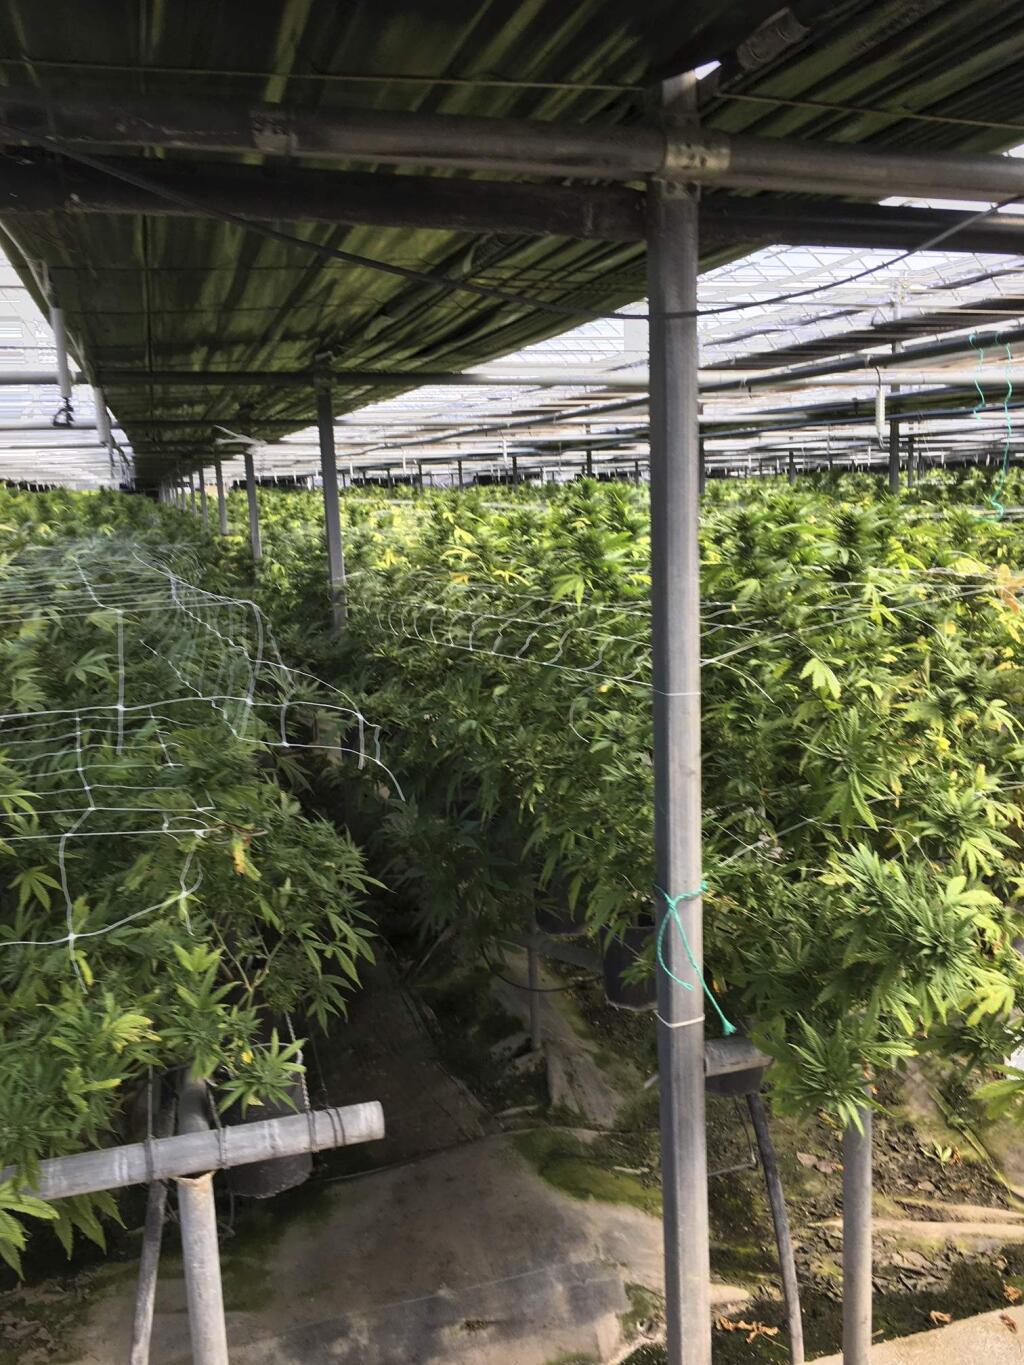 This March 28, 2019 photo provided by the Santa Barbara County Sheriff shows a large illegal marijuana grow operation in Los Alamos, Calif. When California voters broadly legalized marijuana, they were promised that a vast computer platform would closely monitor products moving through the new market. But 16 months after sales kicked in, the system known as track-and-trace isn't doing much of either. (Santa Barbara County Sheriff via AP)